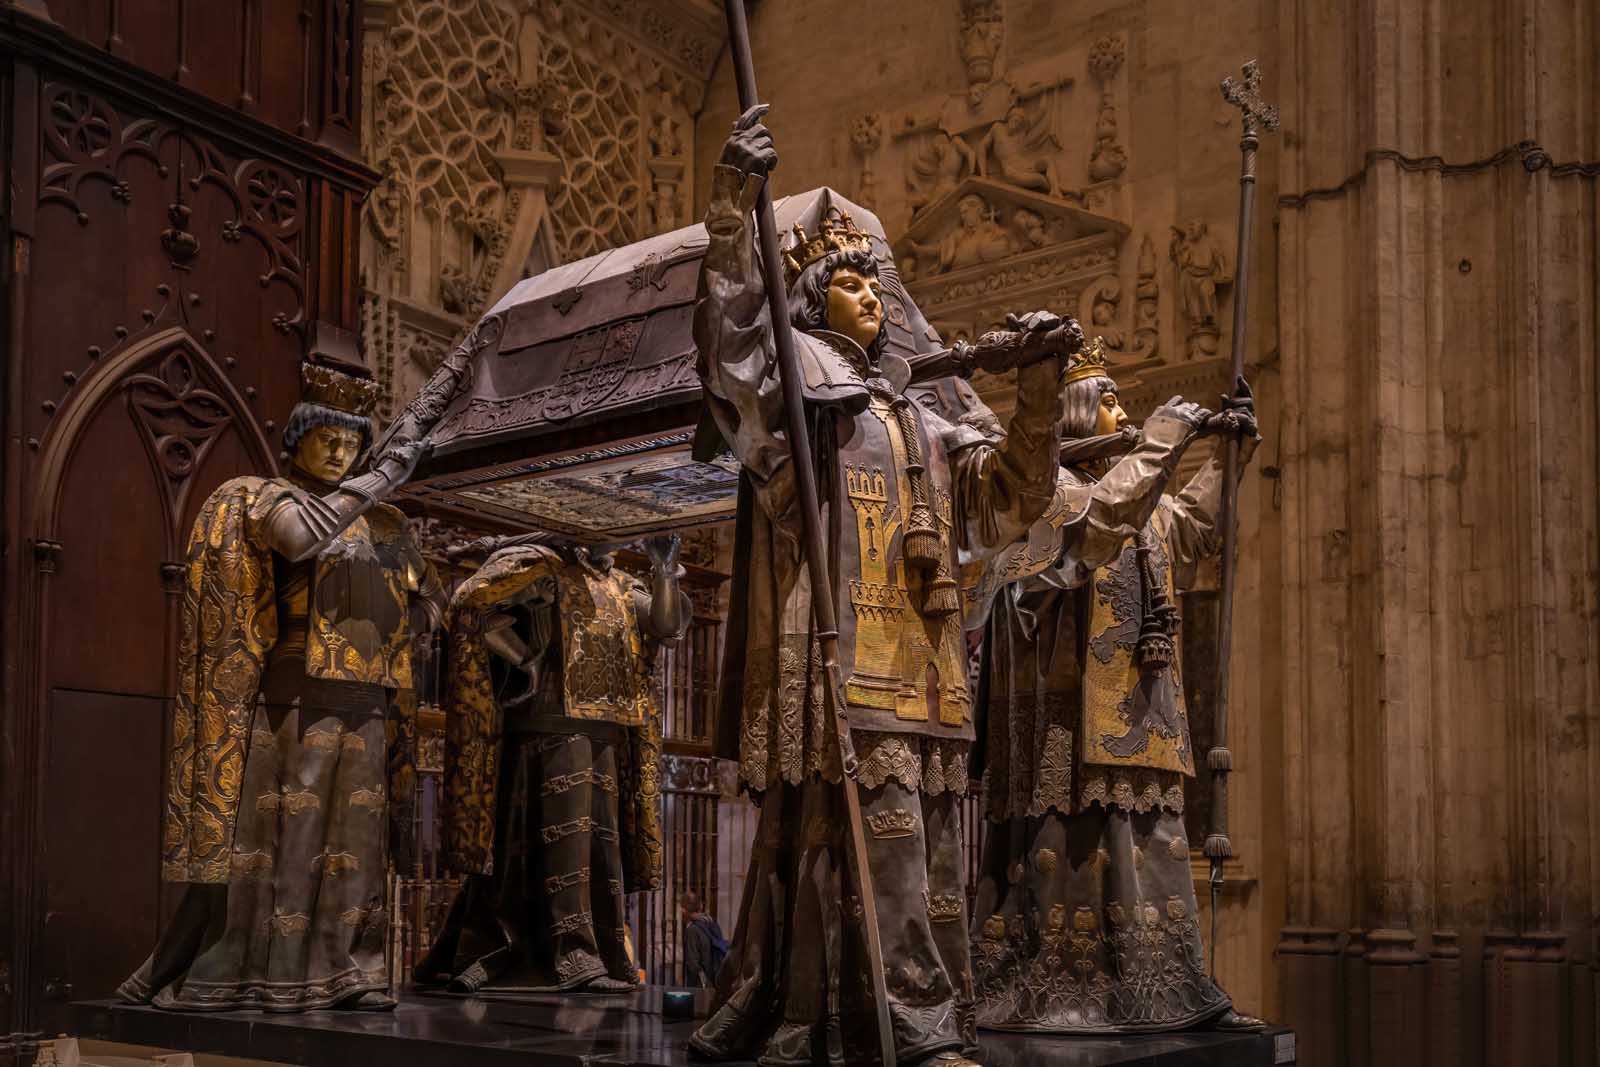 seville spain historical attractions christopher columbus tomb in seville cathedreal